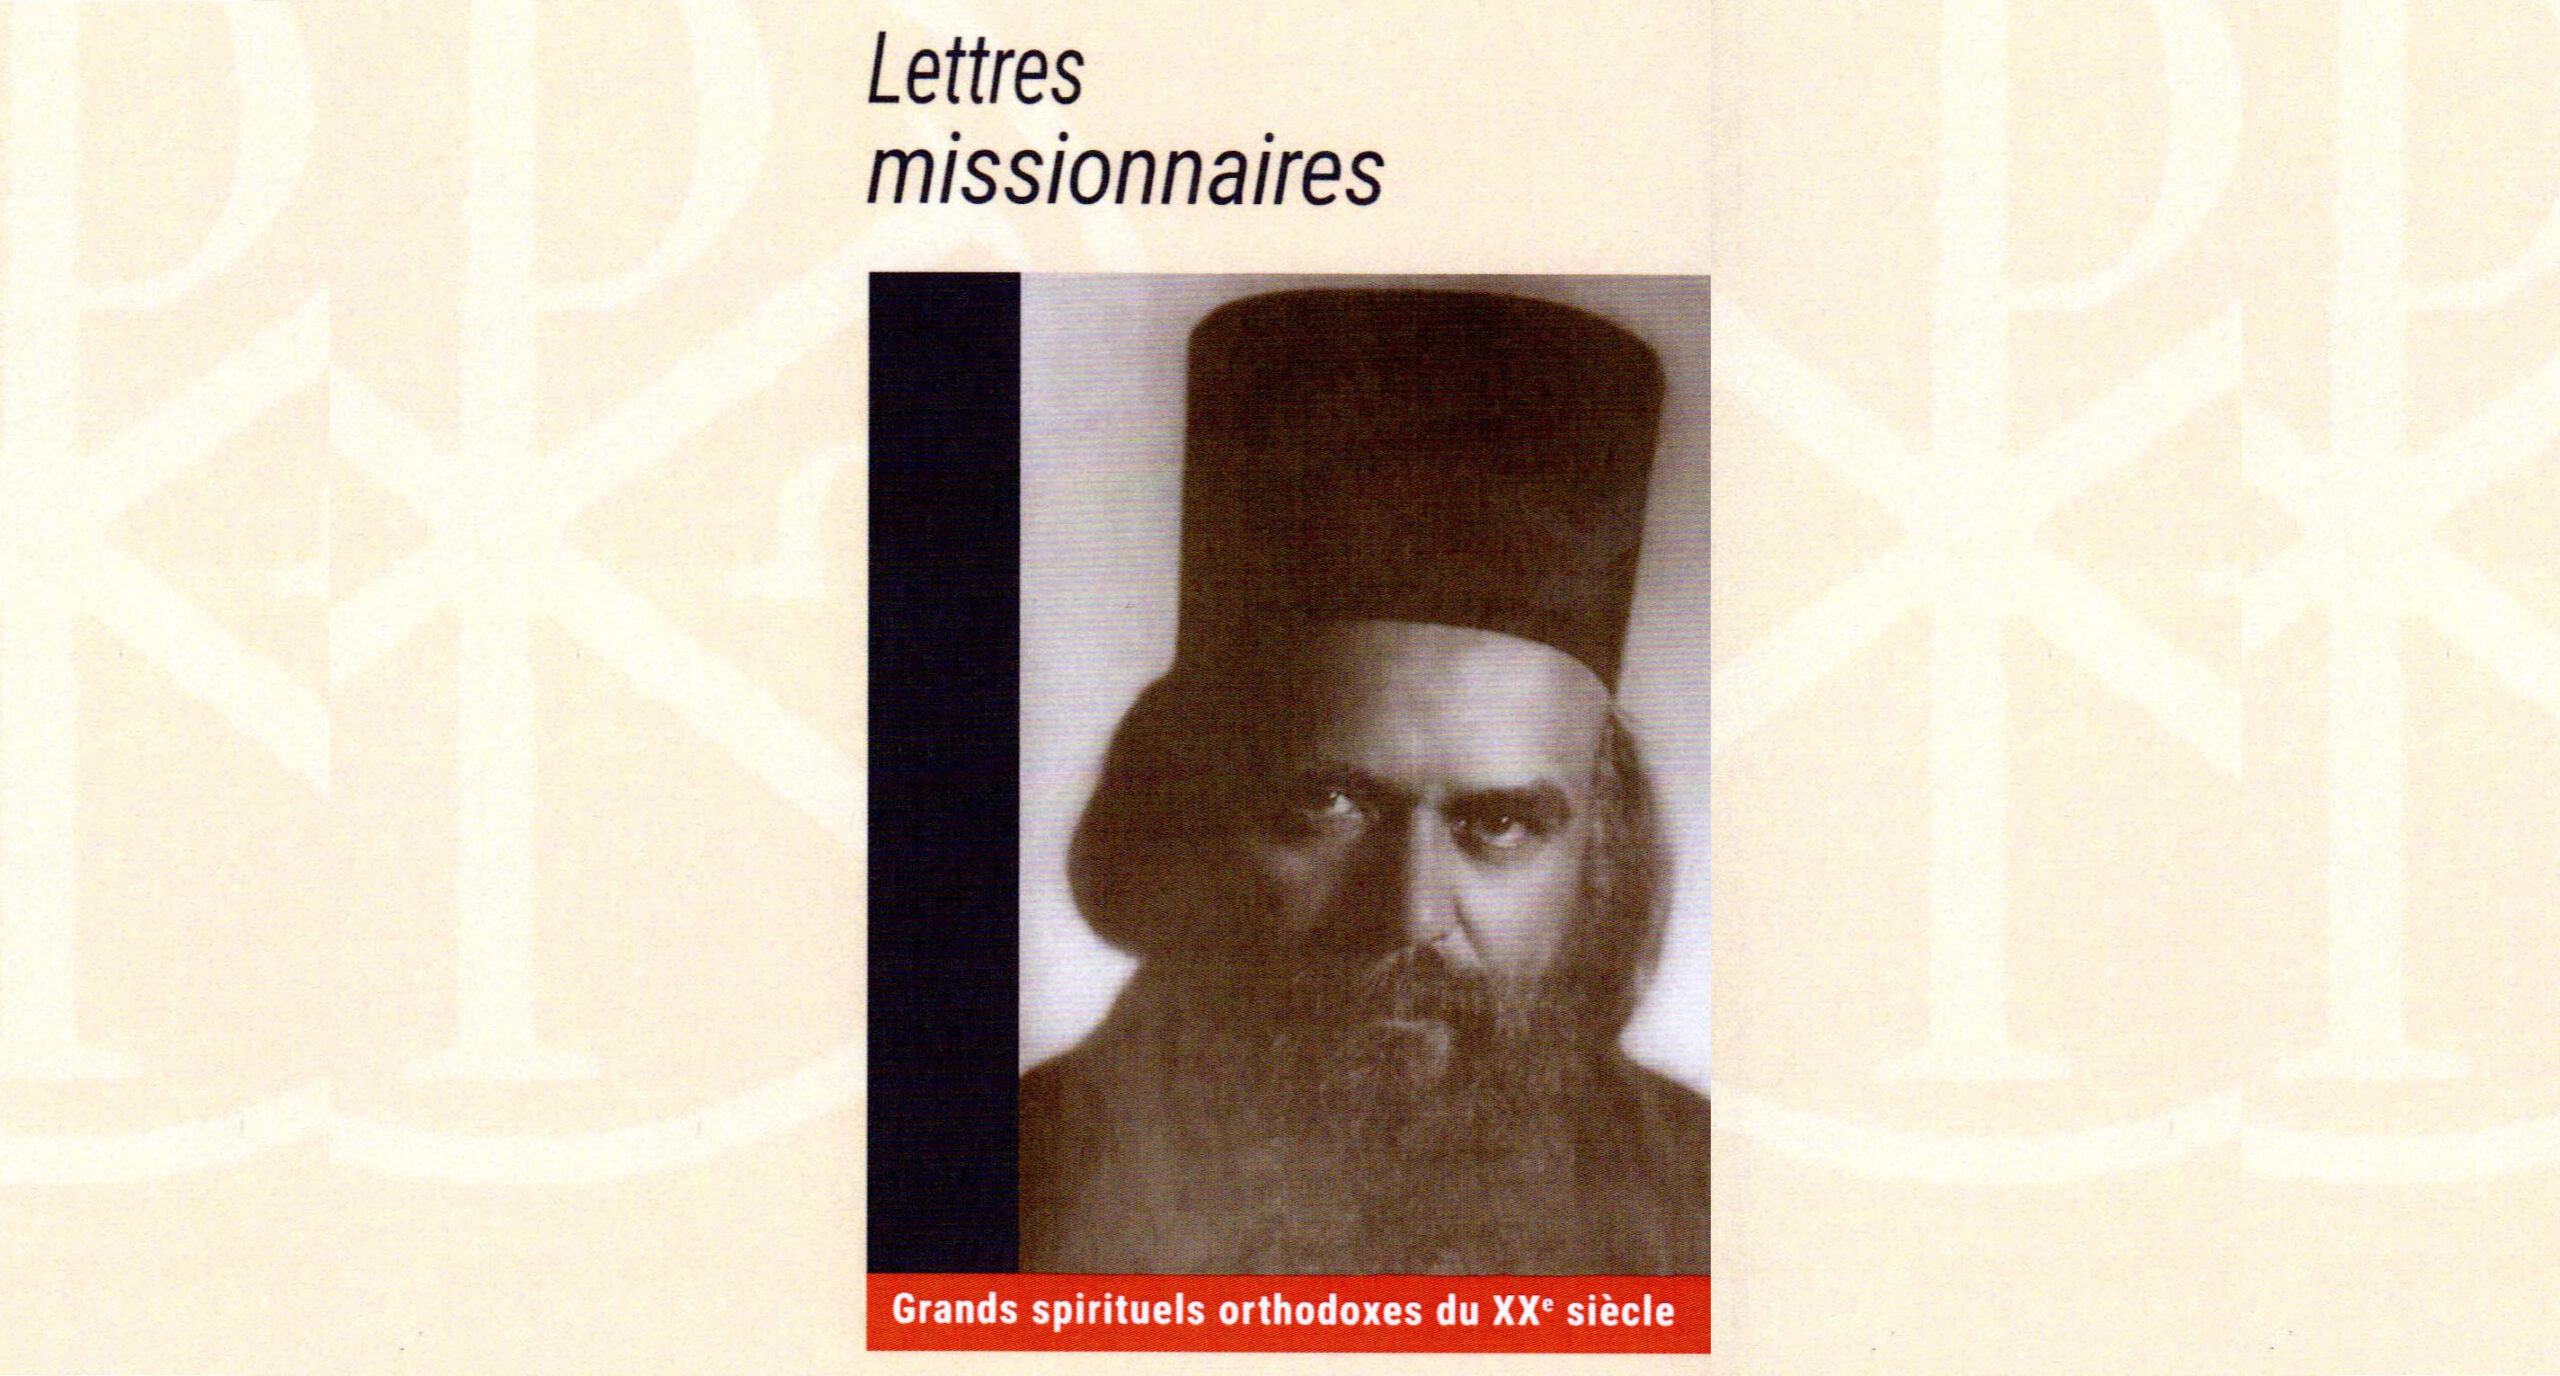 Book review: missionary letters, by saint nikolai velimirovich